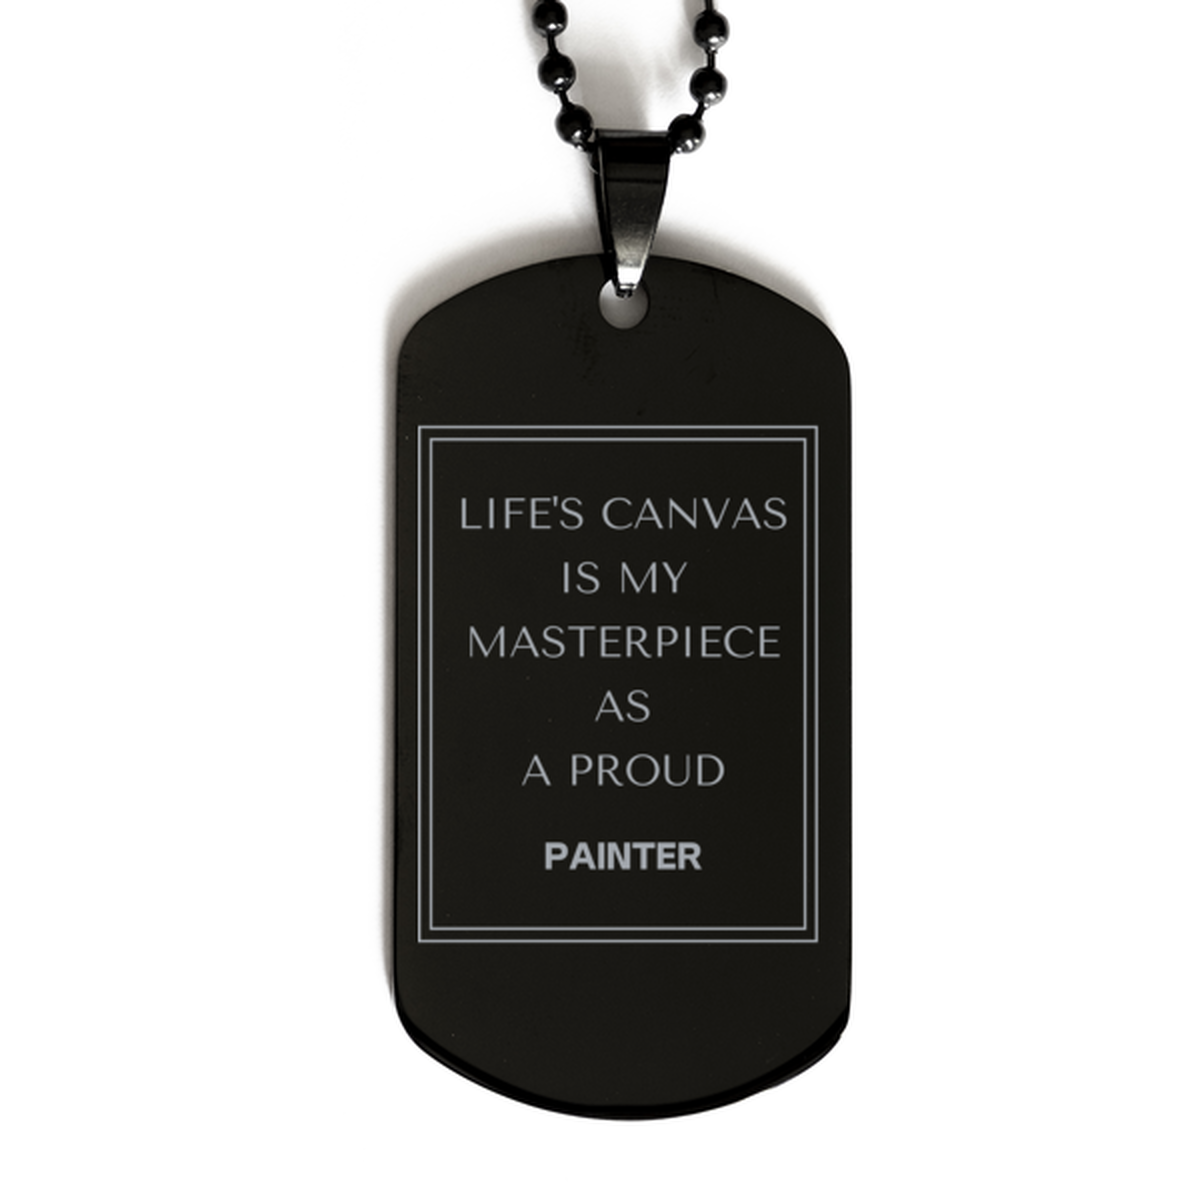 Proud Painter Gifts, Life's canvas is my masterpiece, Epic Birthday Christmas Unique Black Dog Tag For Painter, Coworkers, Men, Women, Friends